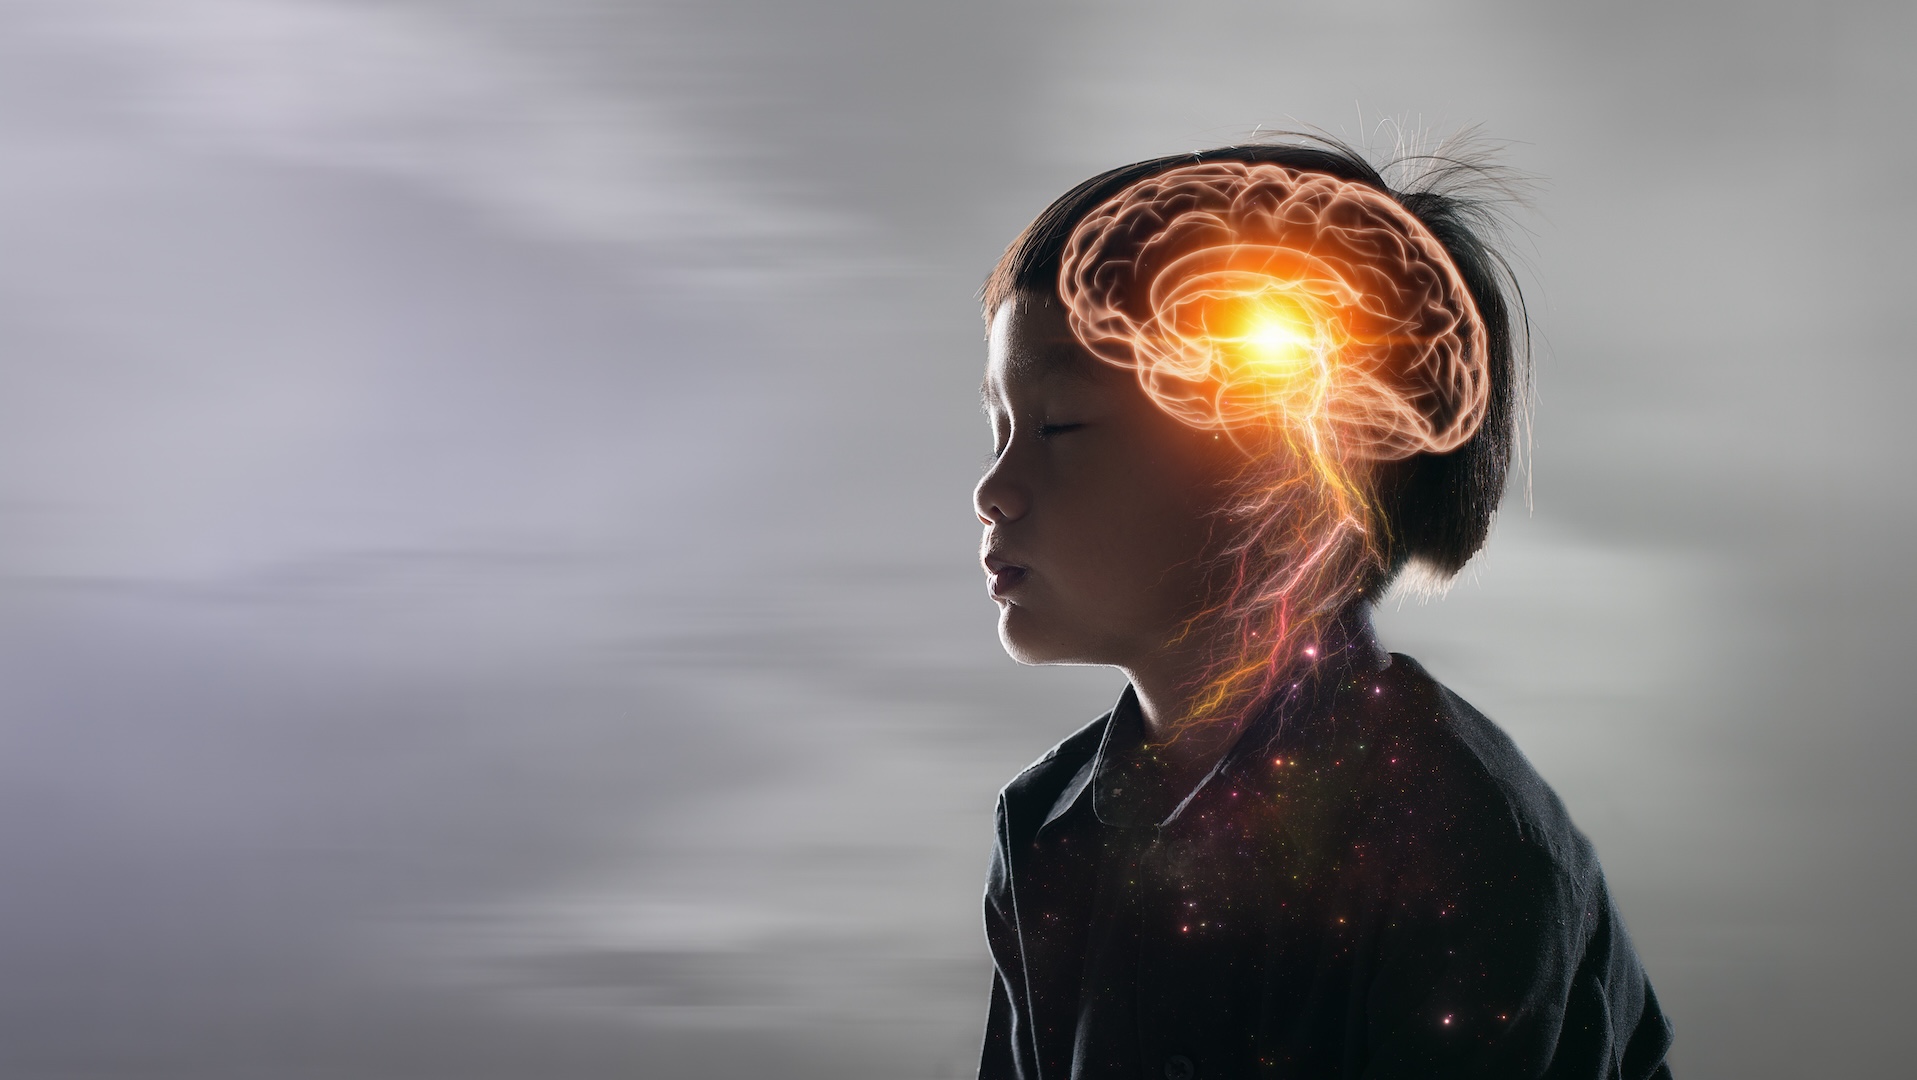 An illustration of a child with her eyes closed. A glowing illustration of a brain is on the side of her head.